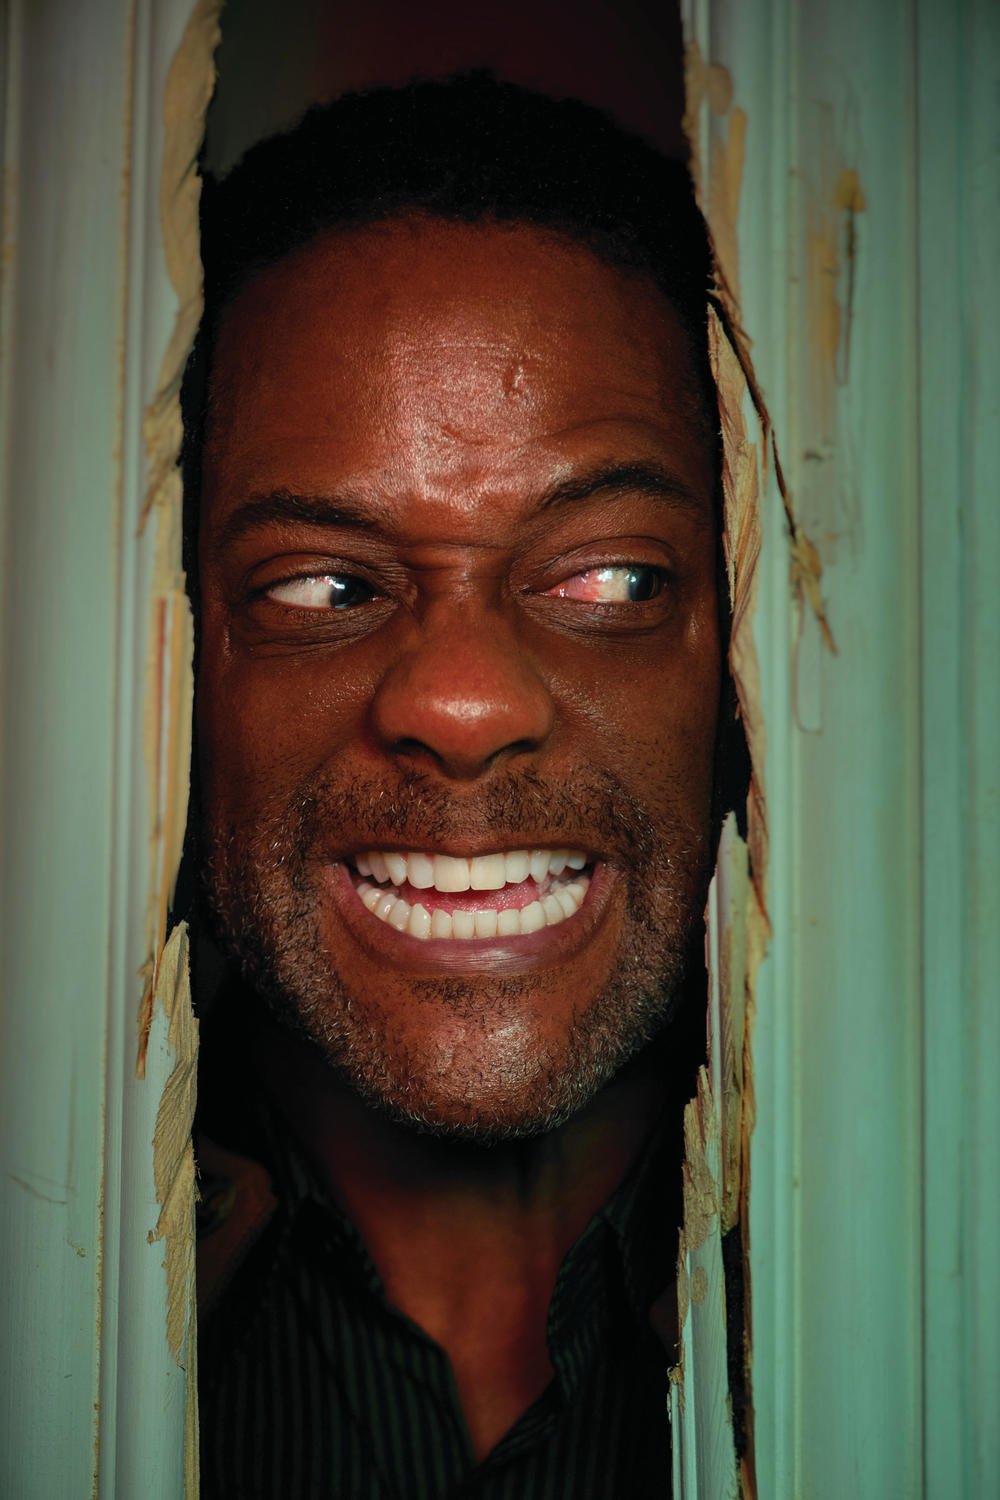 Here's Johnny, also known as Blair Underwood, recreating that memorable scene from 1980's <em>The Shining</em>.